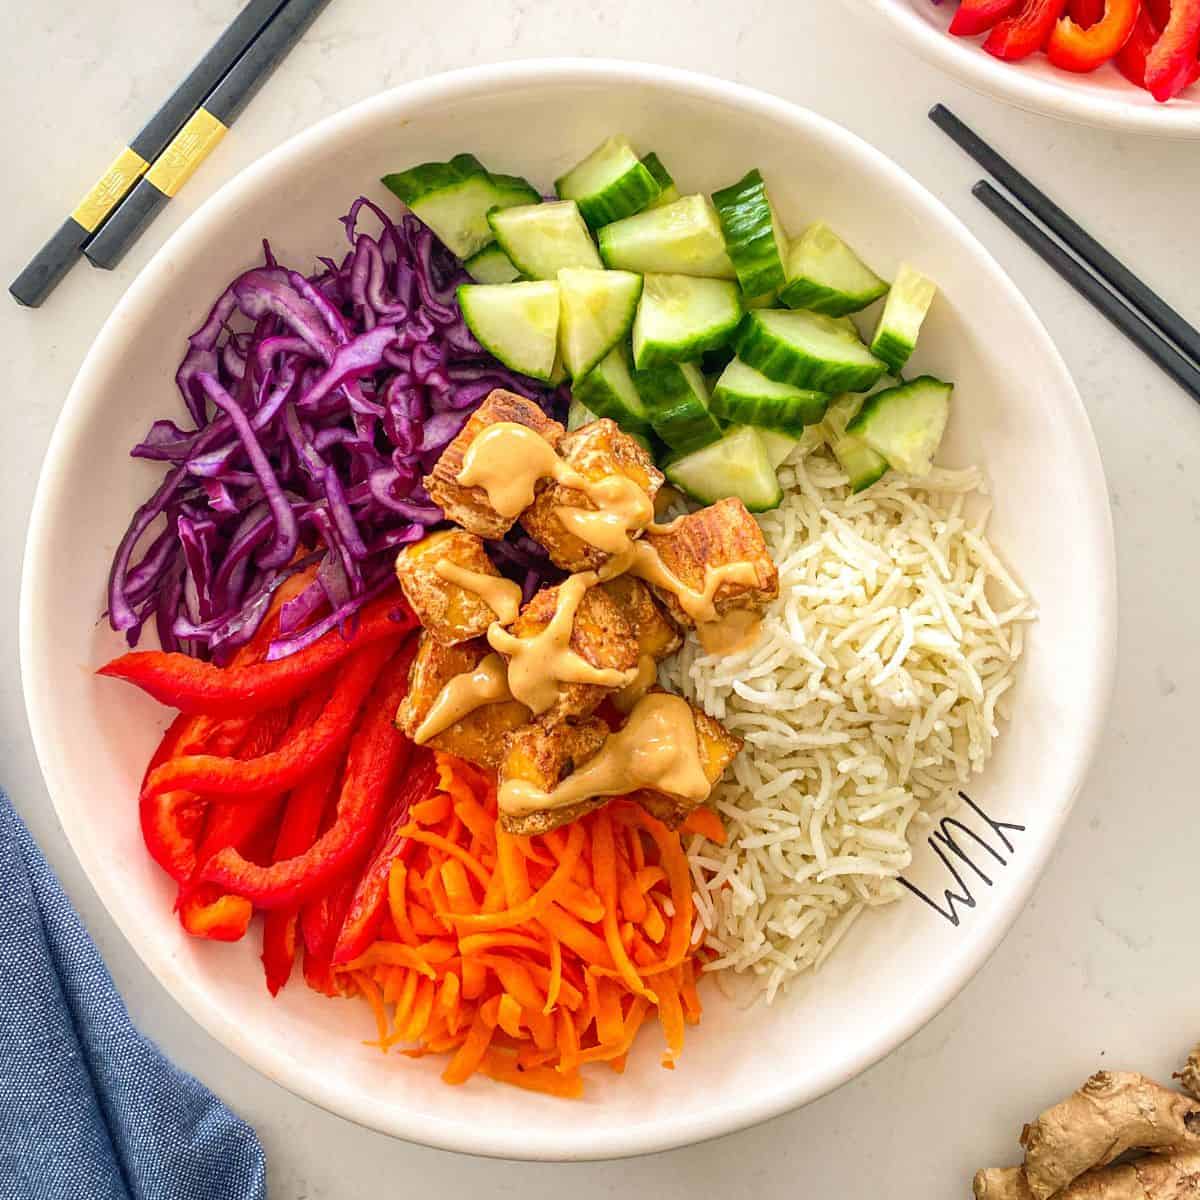 Bowl with peanut tofu, cucumber, rice, red pepper, shredded carrots and purple cabbage.